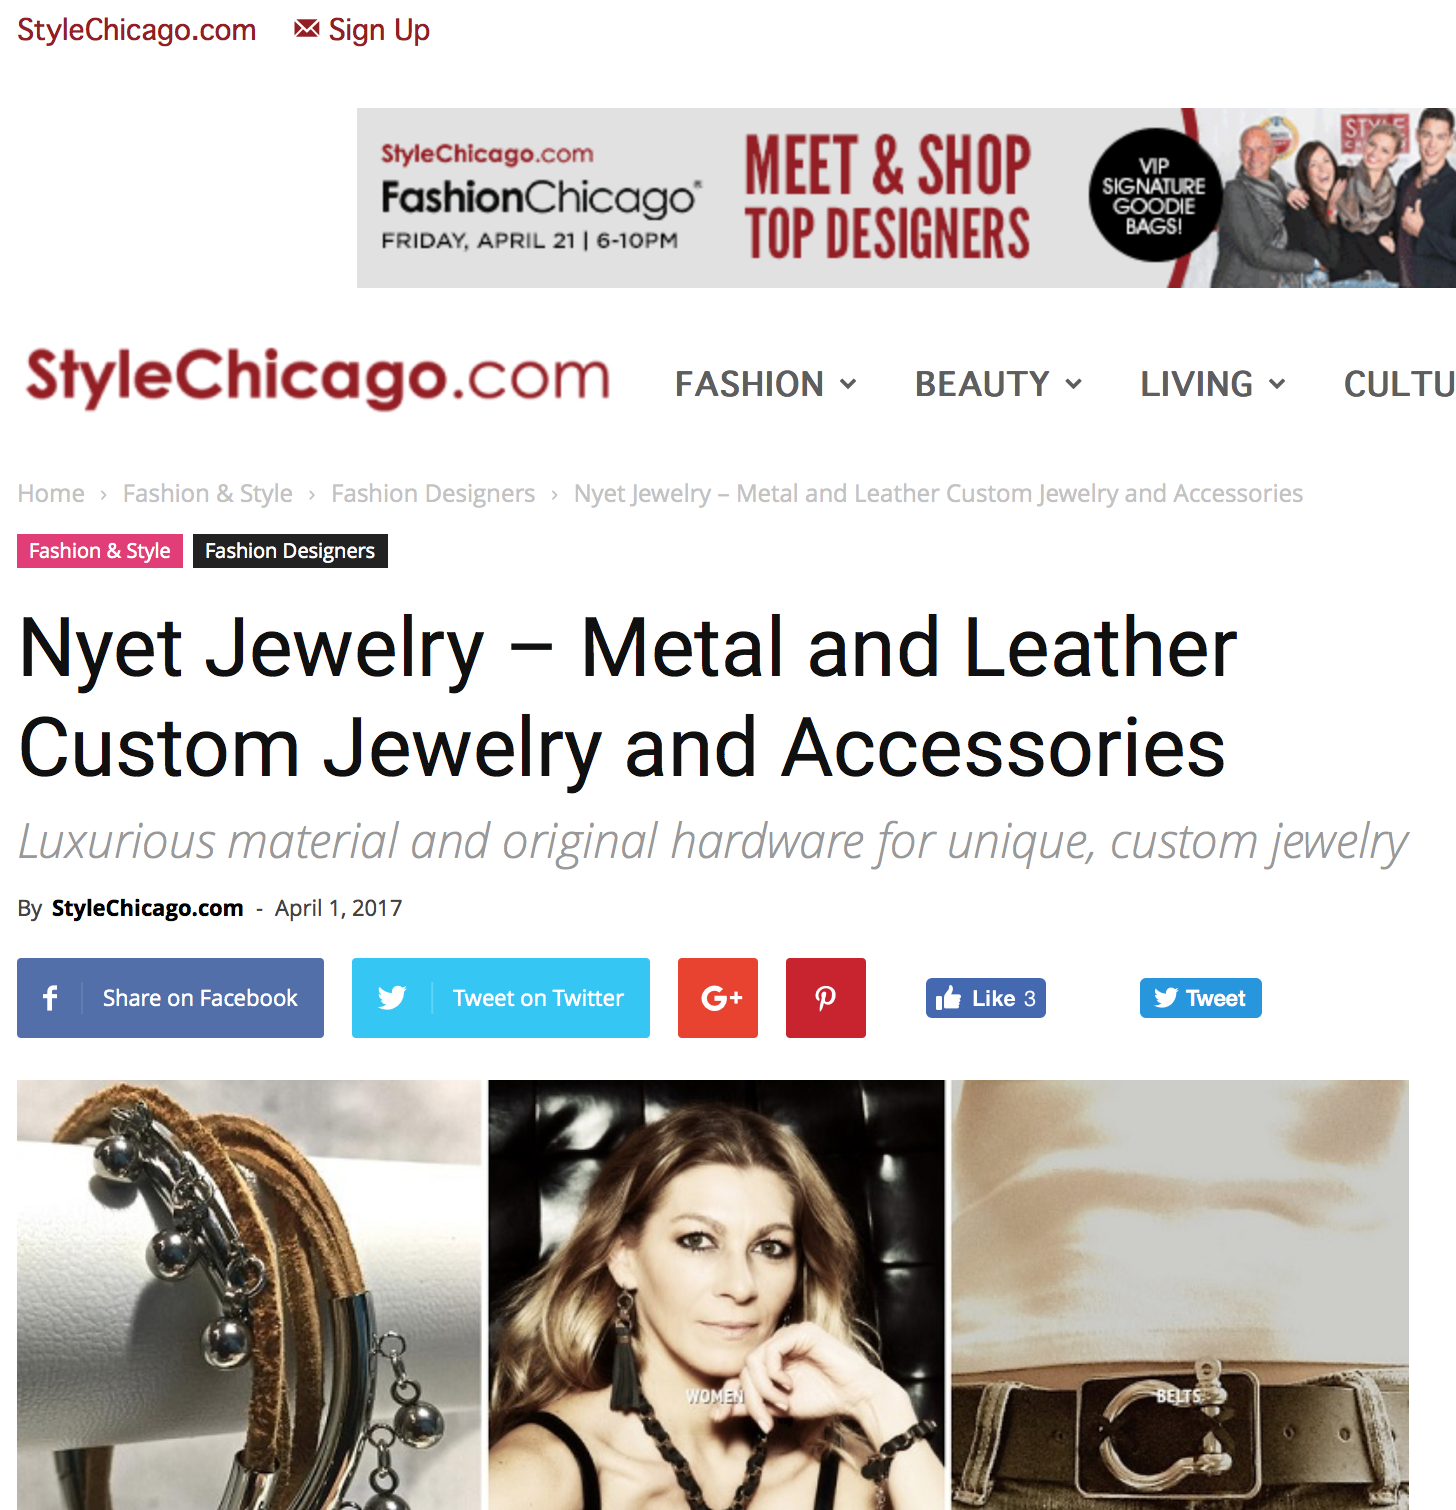 NYET JEWELRY FEATURED IN STYLECHICAGO.COM APRIL 2017